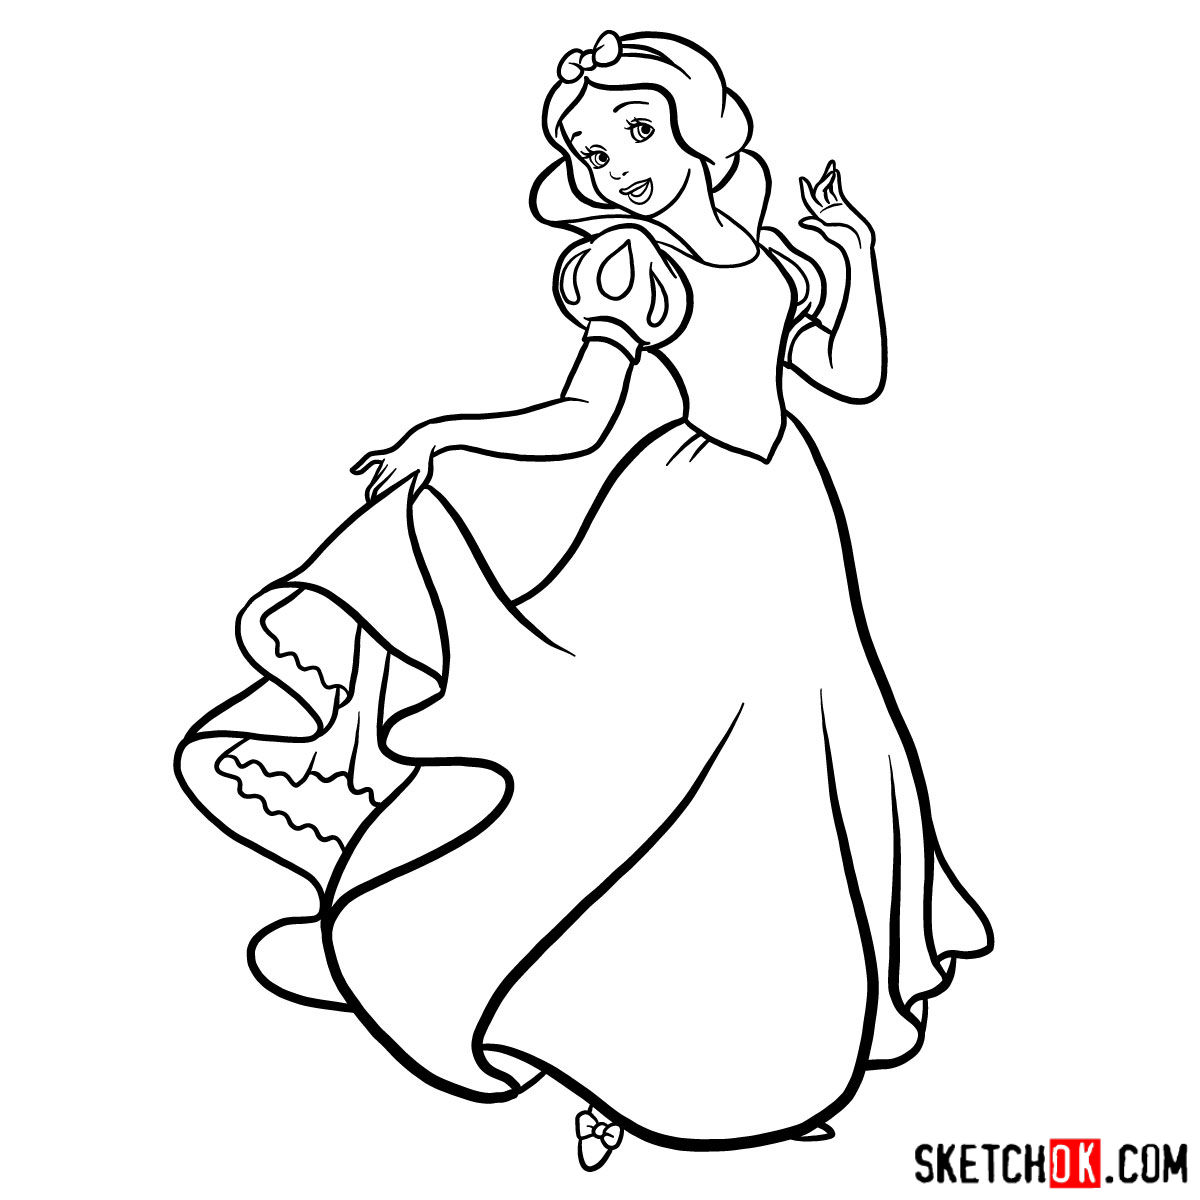 How to draw Snow White - step 15